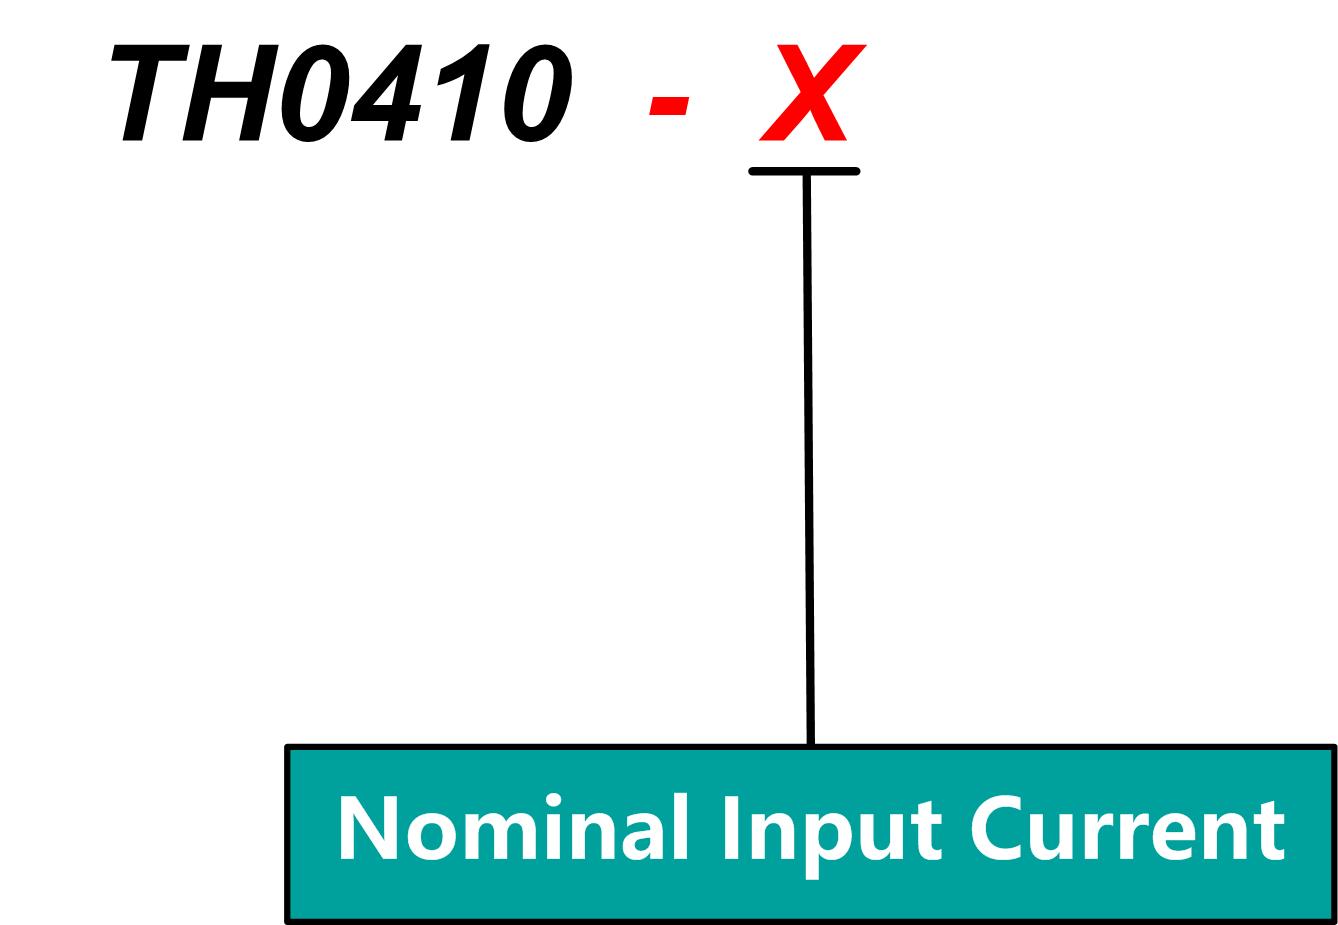 TH0410 High Frequency Coaxial Shunt Ordering Information